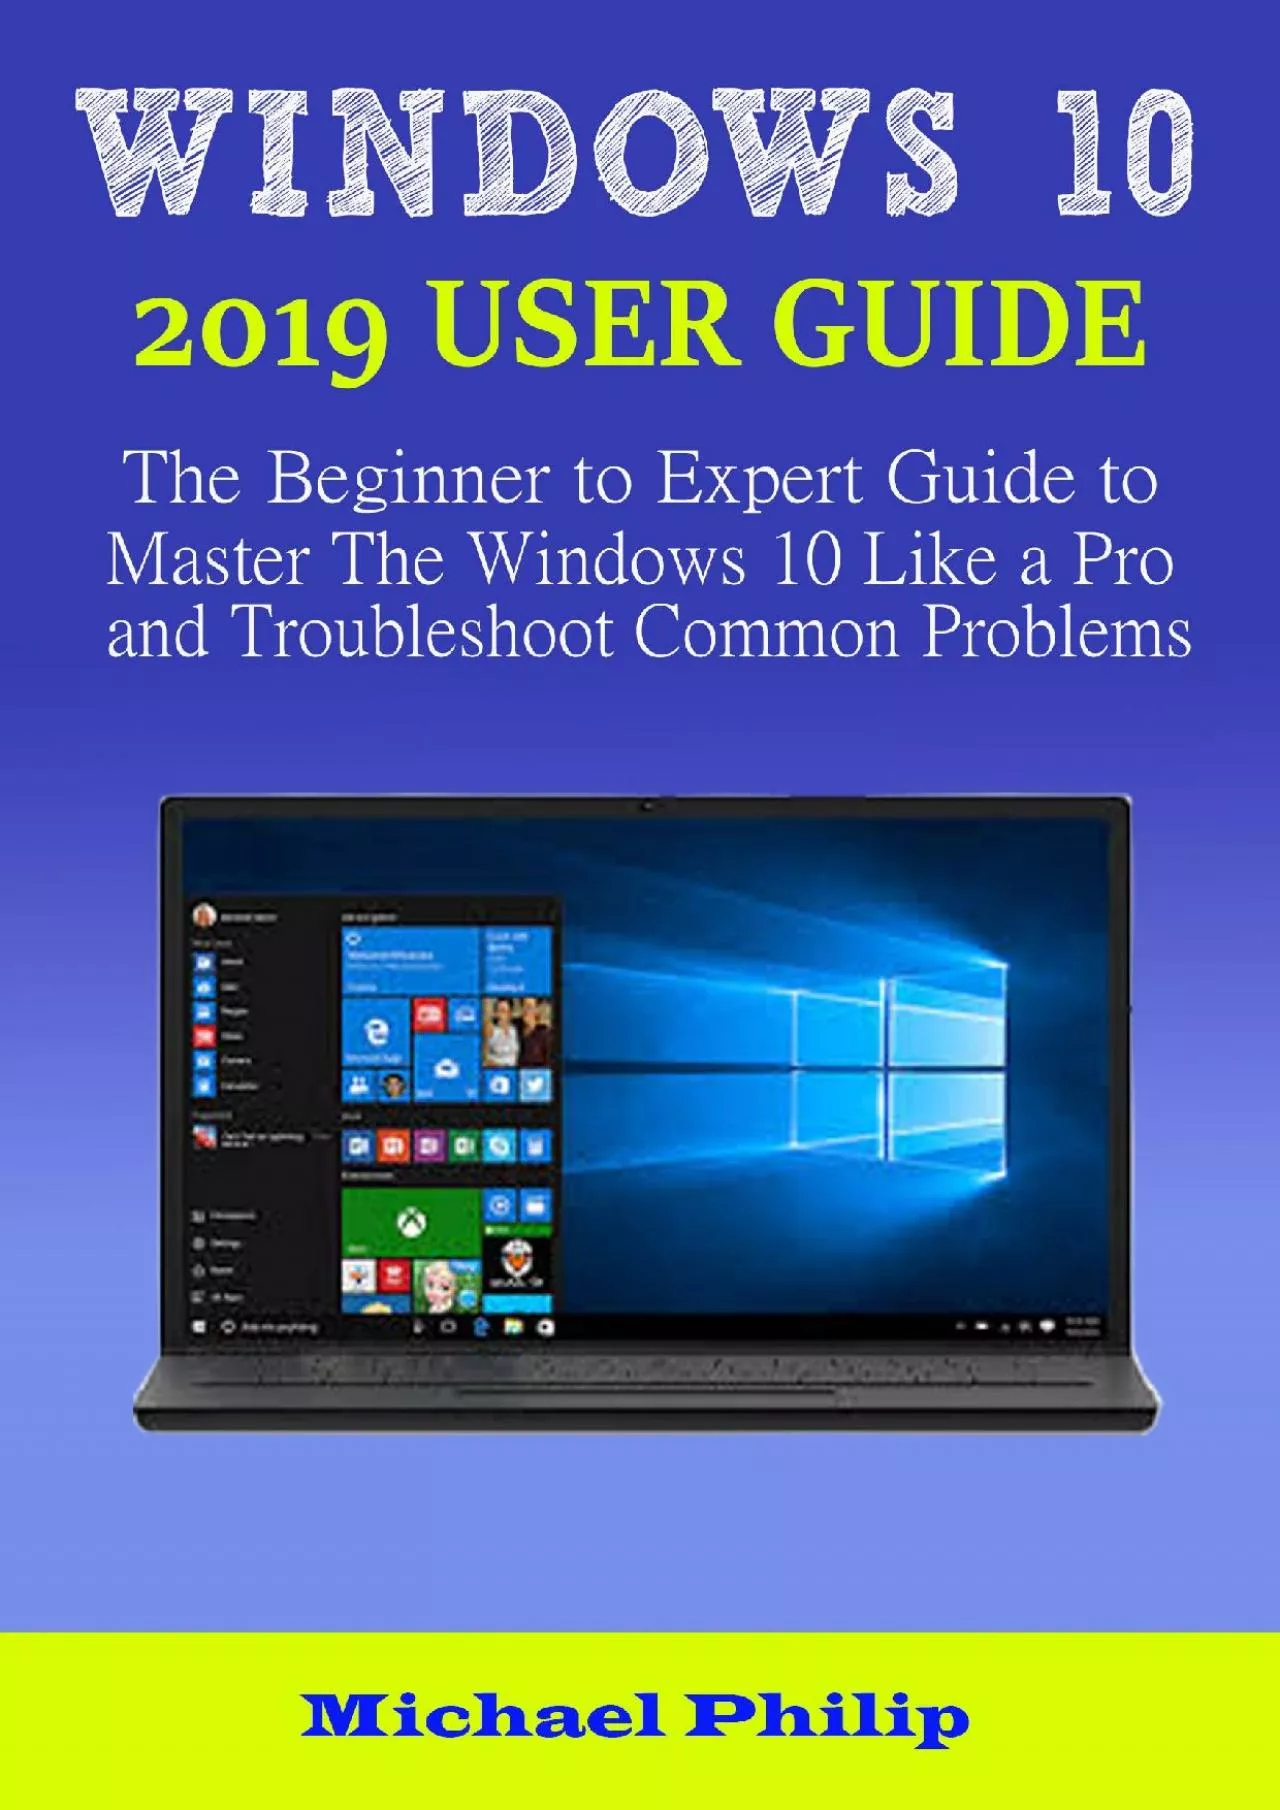 WINDOWS 0 209 USER GUIDE The Beginner to Expert Guide to Master the Windows 0 like a Pro